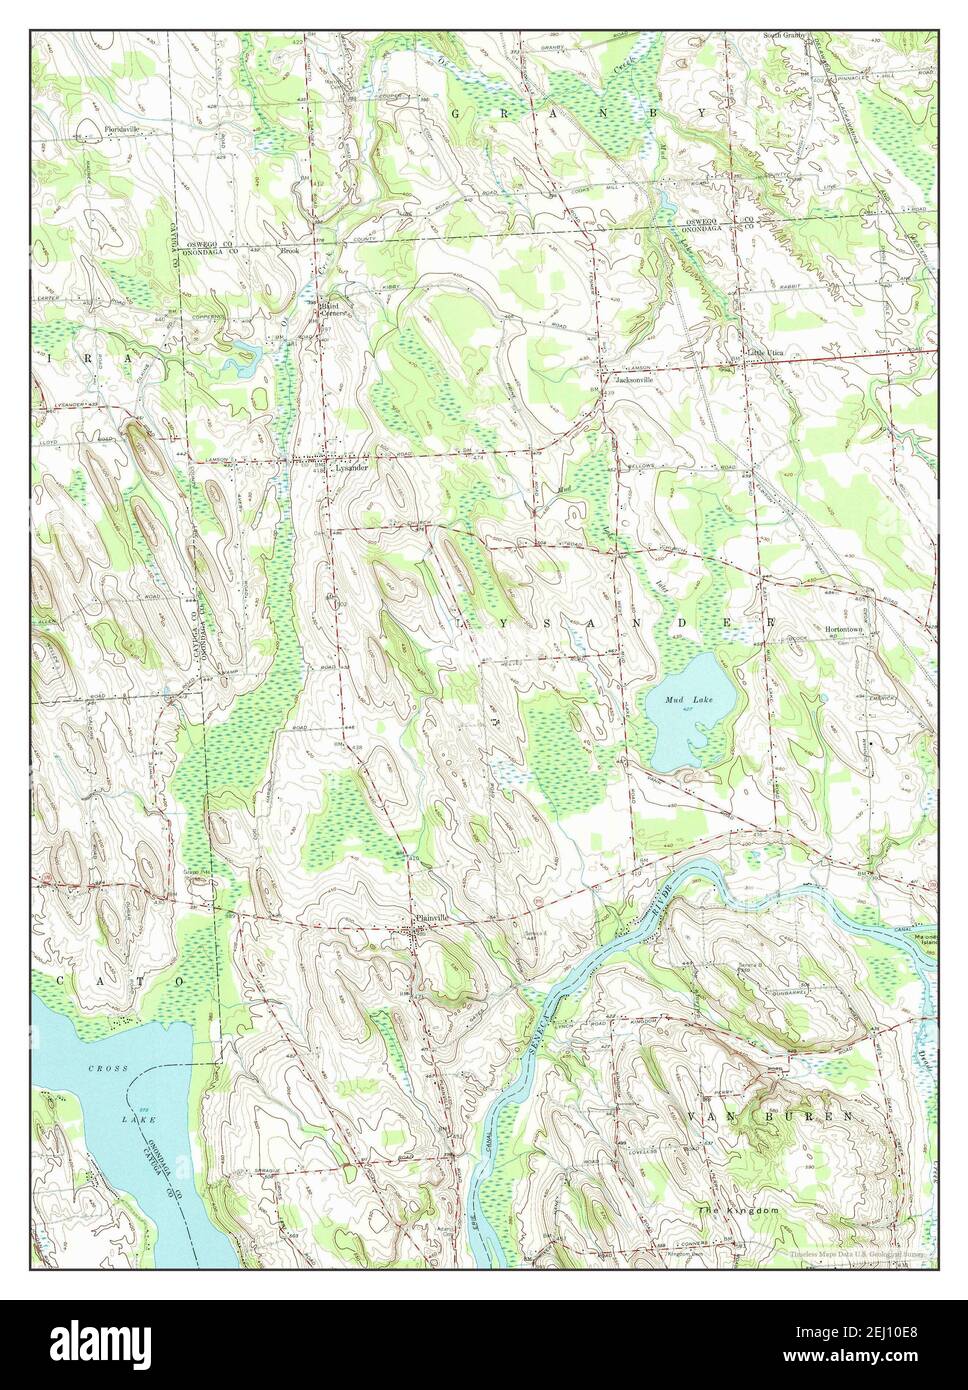 Lysander, New York, map 1955, 1:24000, United States of America by Timeless Maps, data U.S. Geological Survey Stock Photo